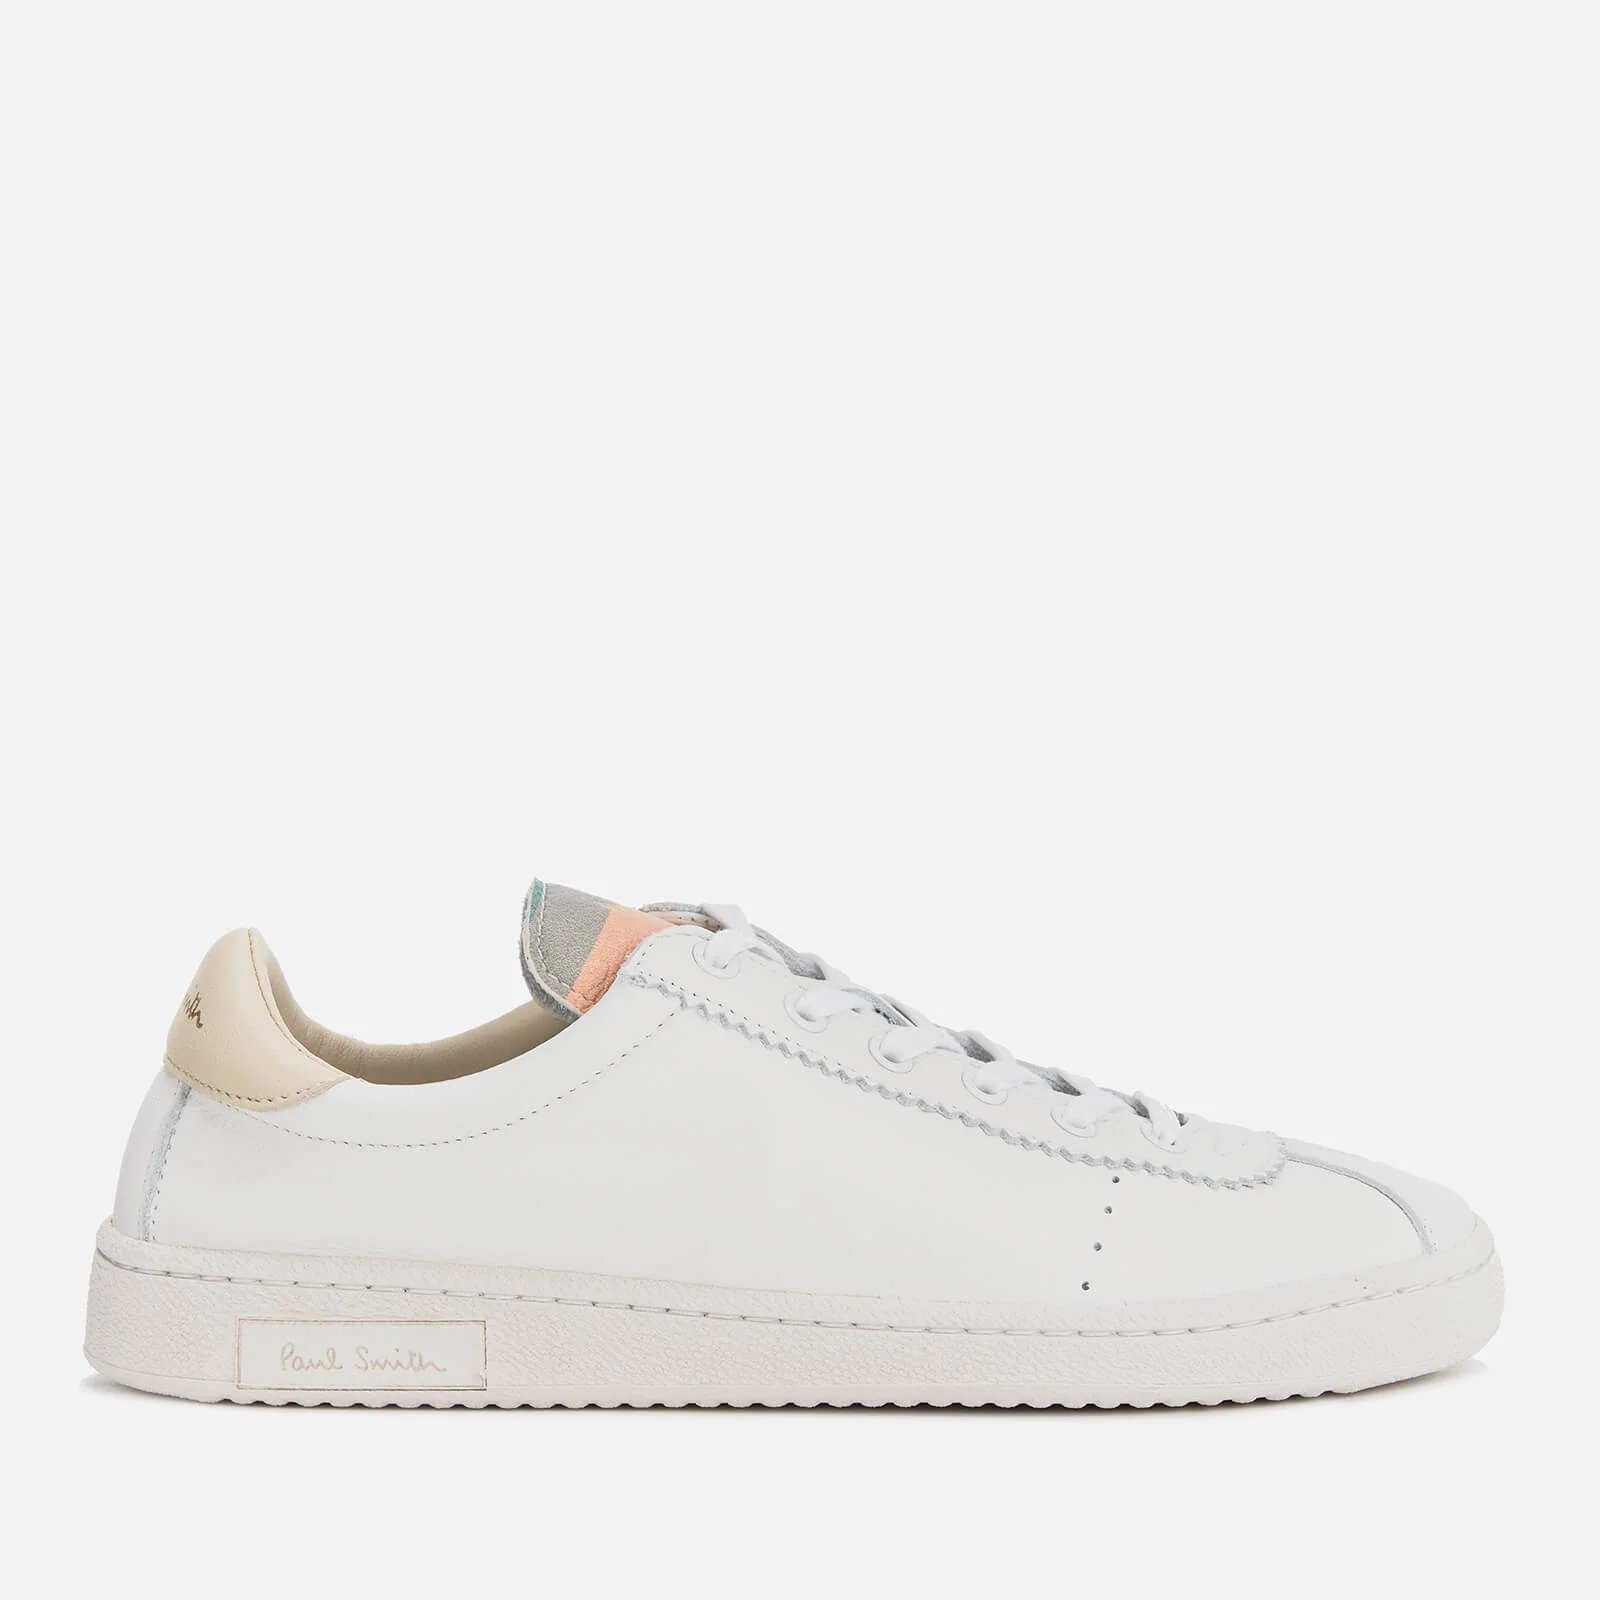 PS Paul Smith Women's Dusty Leather Trainers - White Image 1